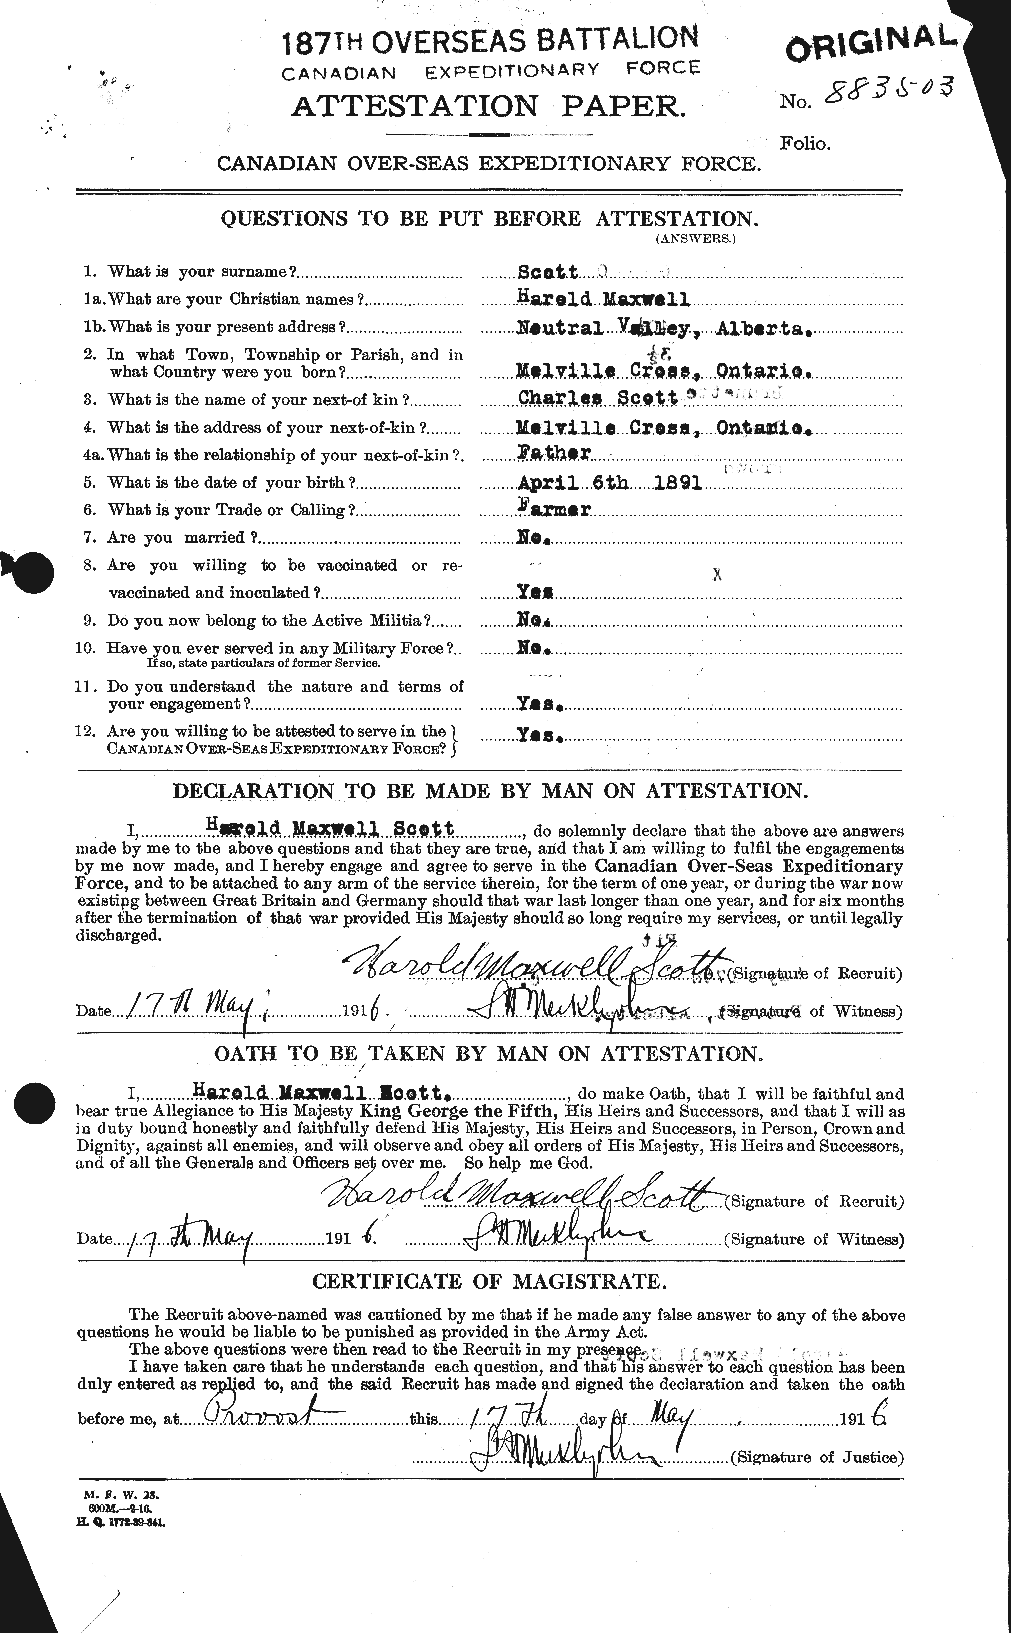 Personnel Records of the First World War - CEF 086335a